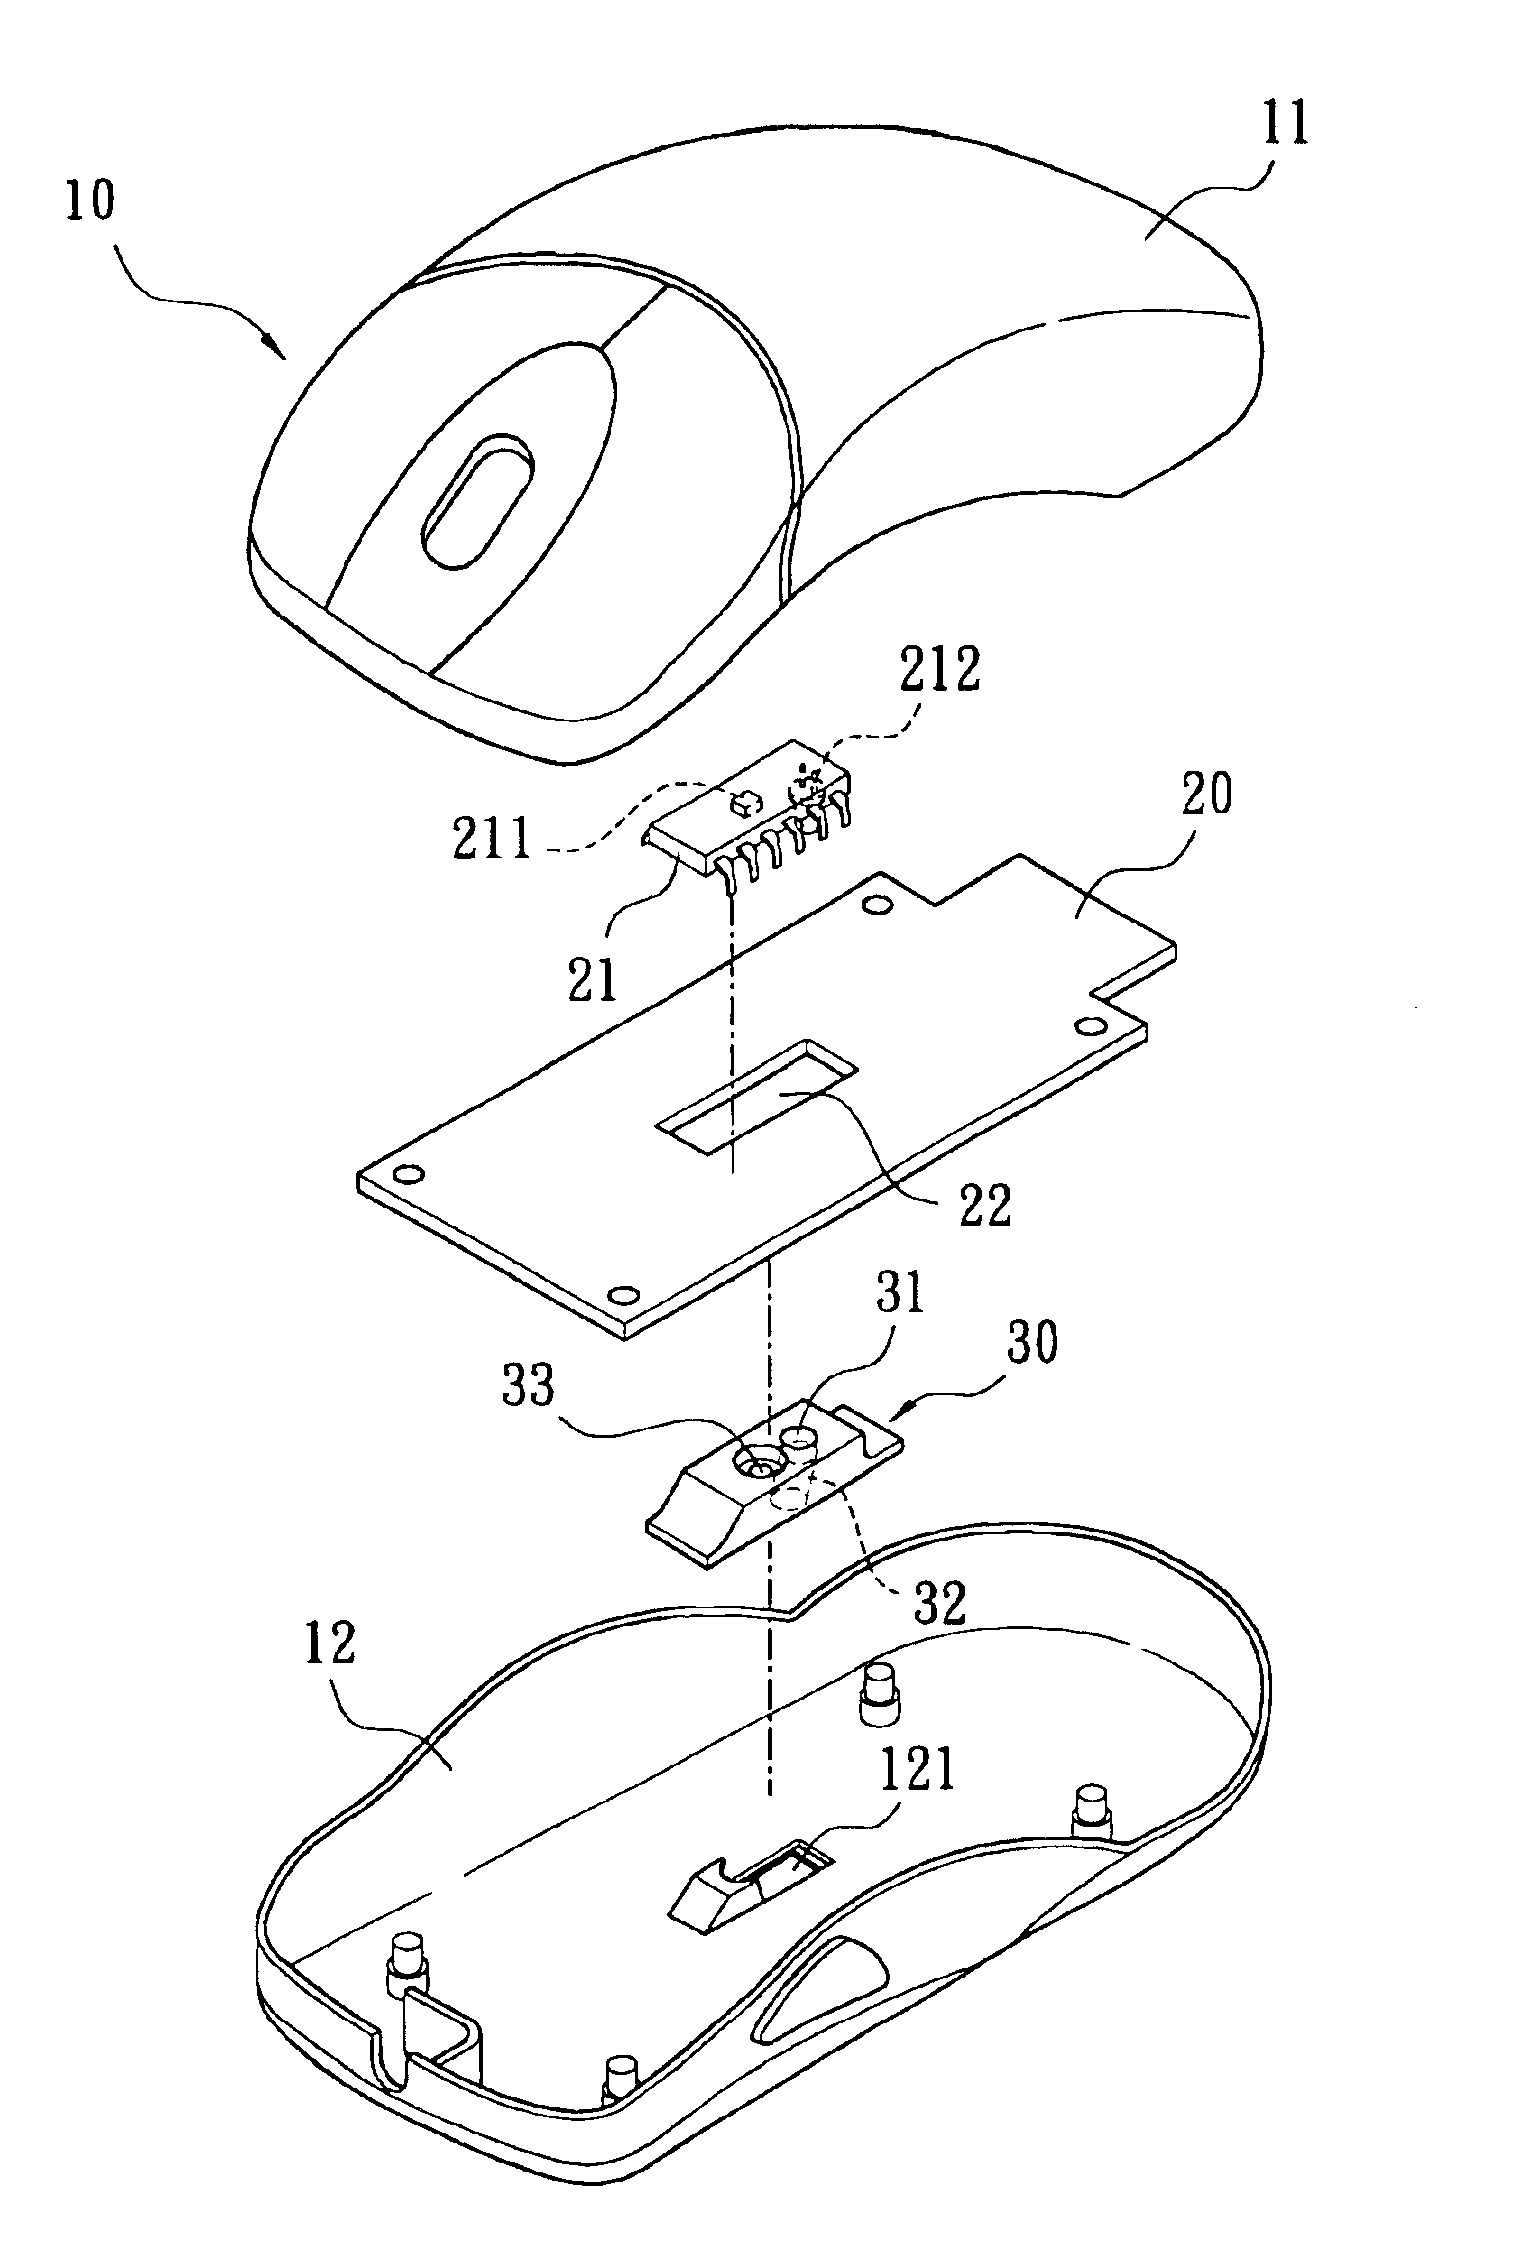 Optical mouse with uniform light projection